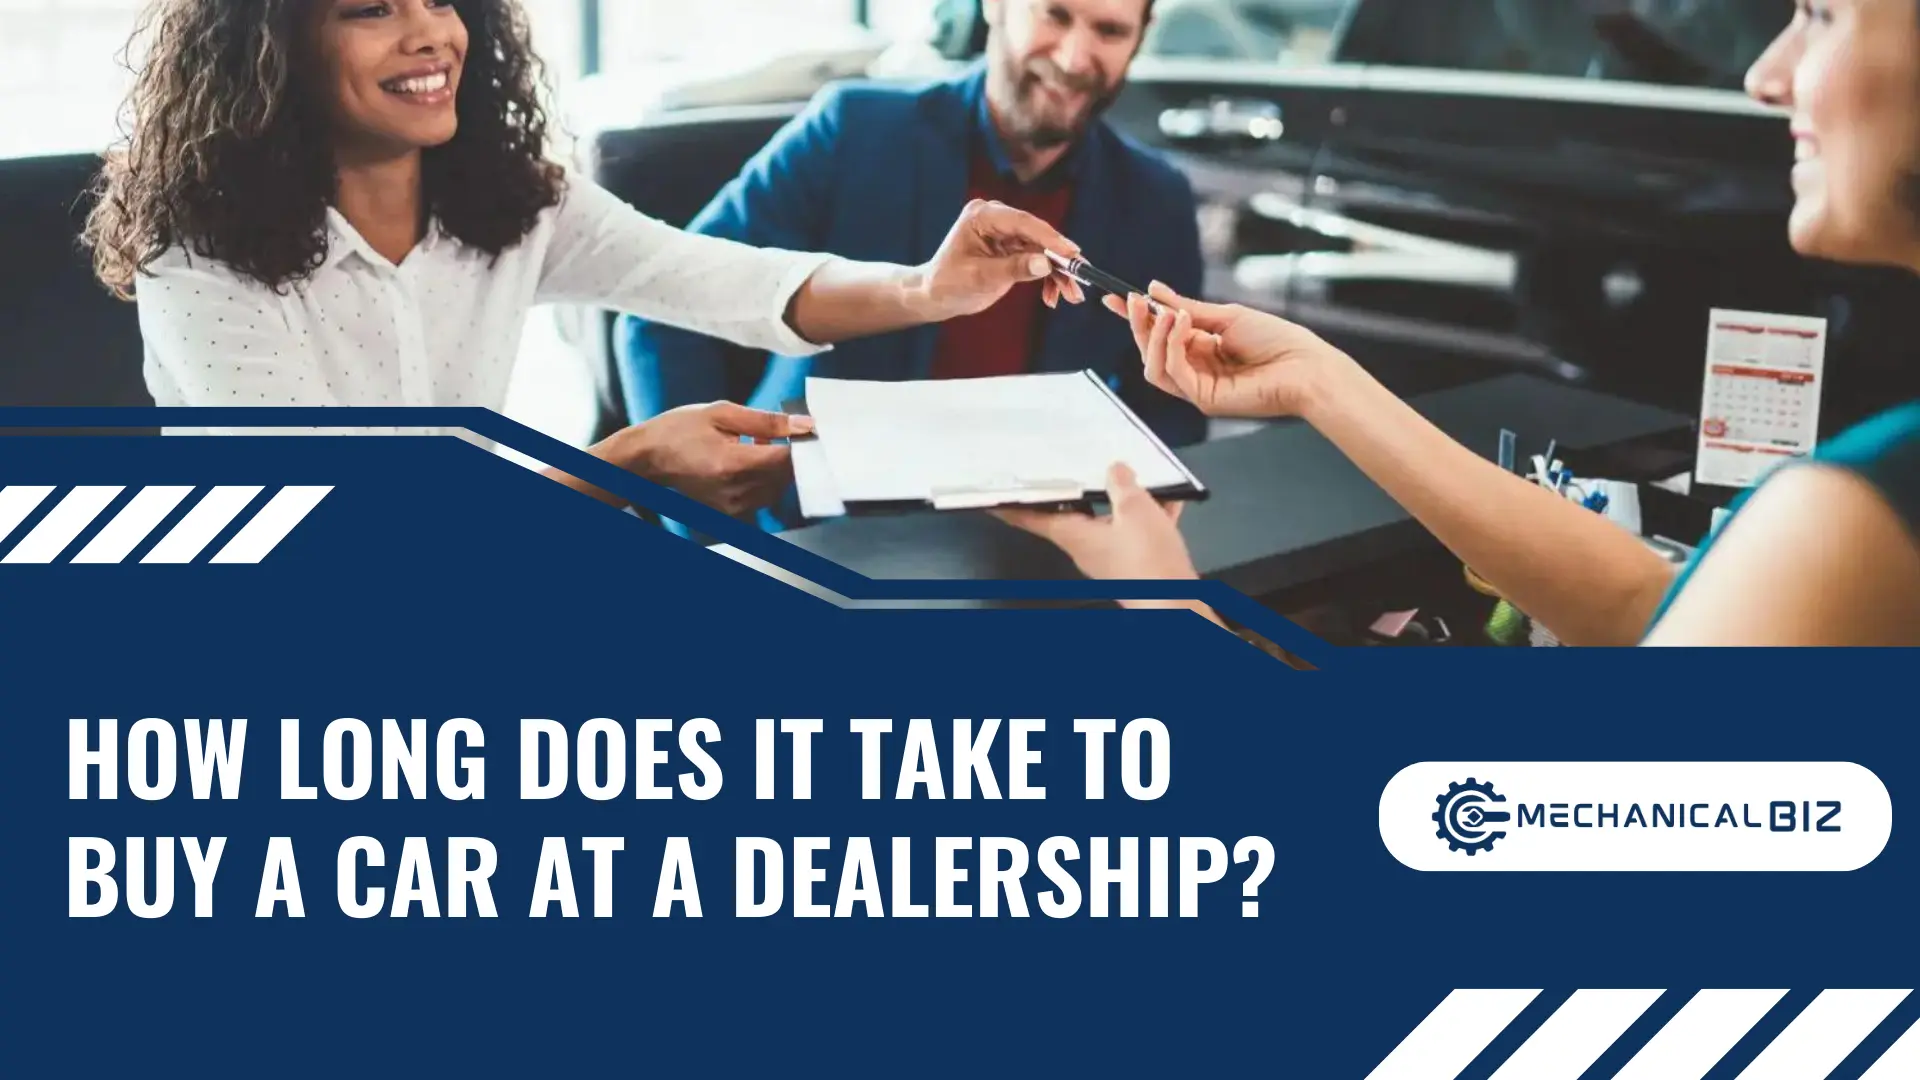 How Long Does It Take to Buy a Car at a Dealership